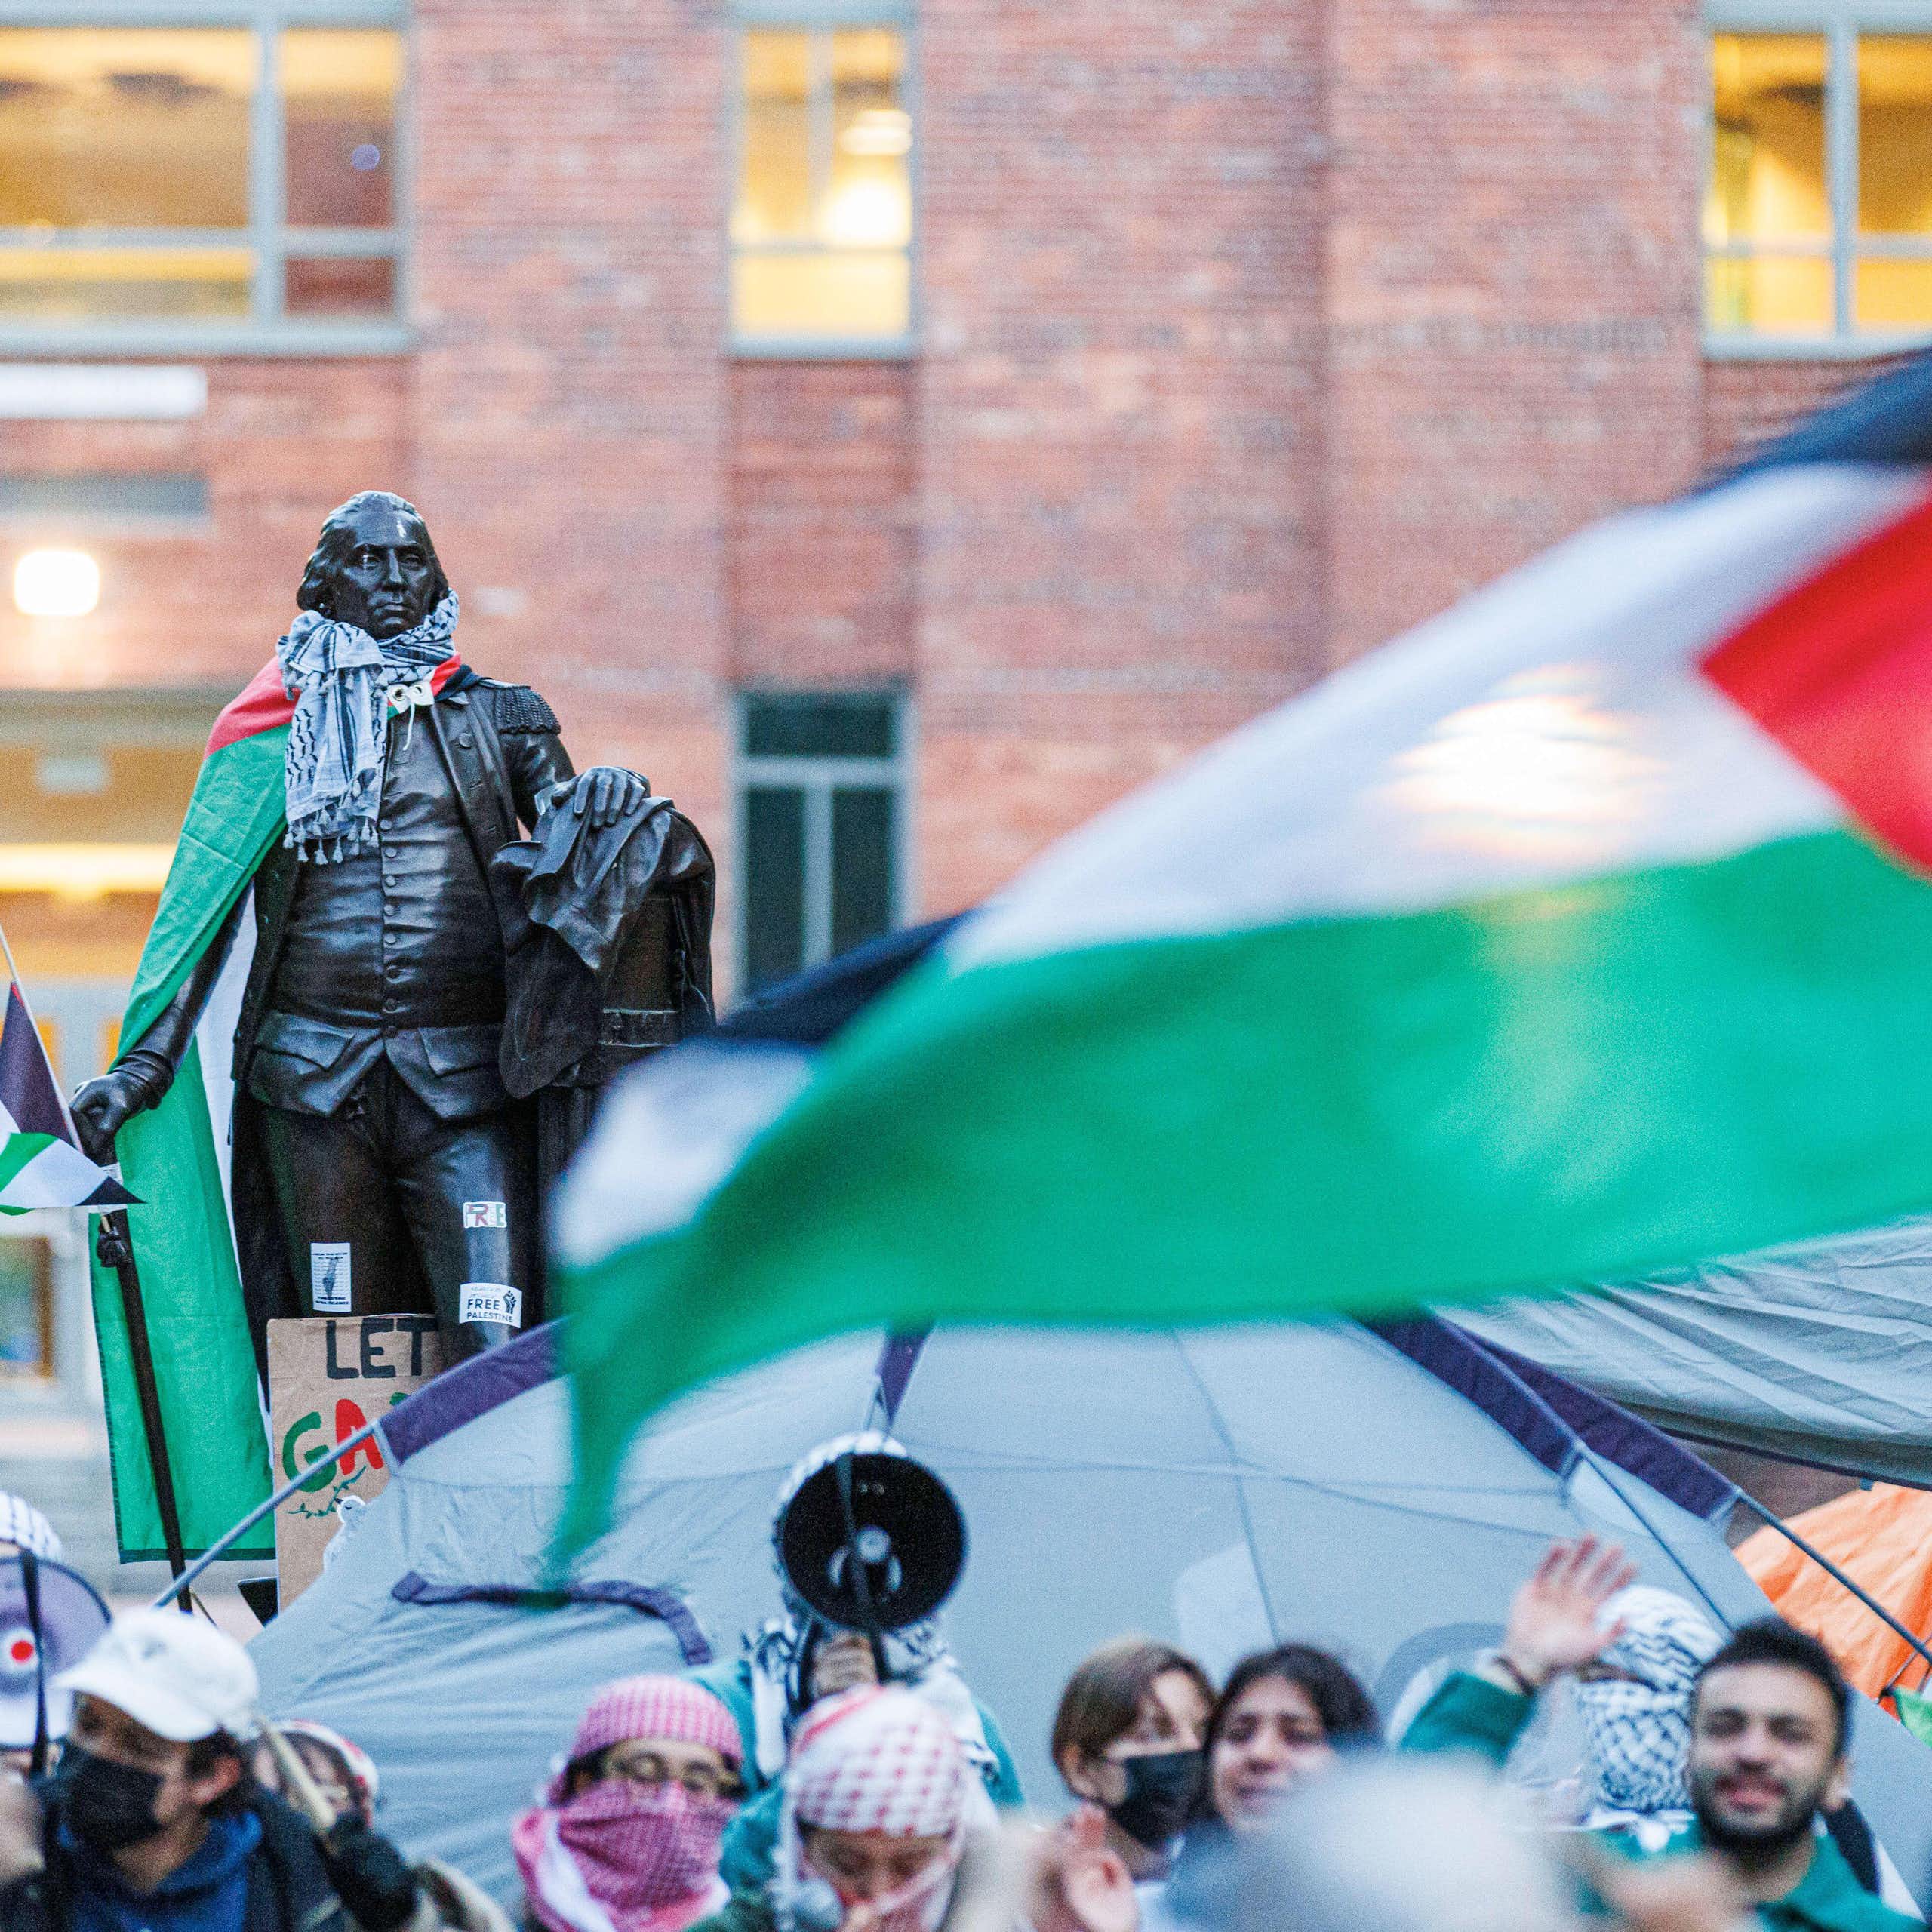 A large Palestinian flag and students protesting.